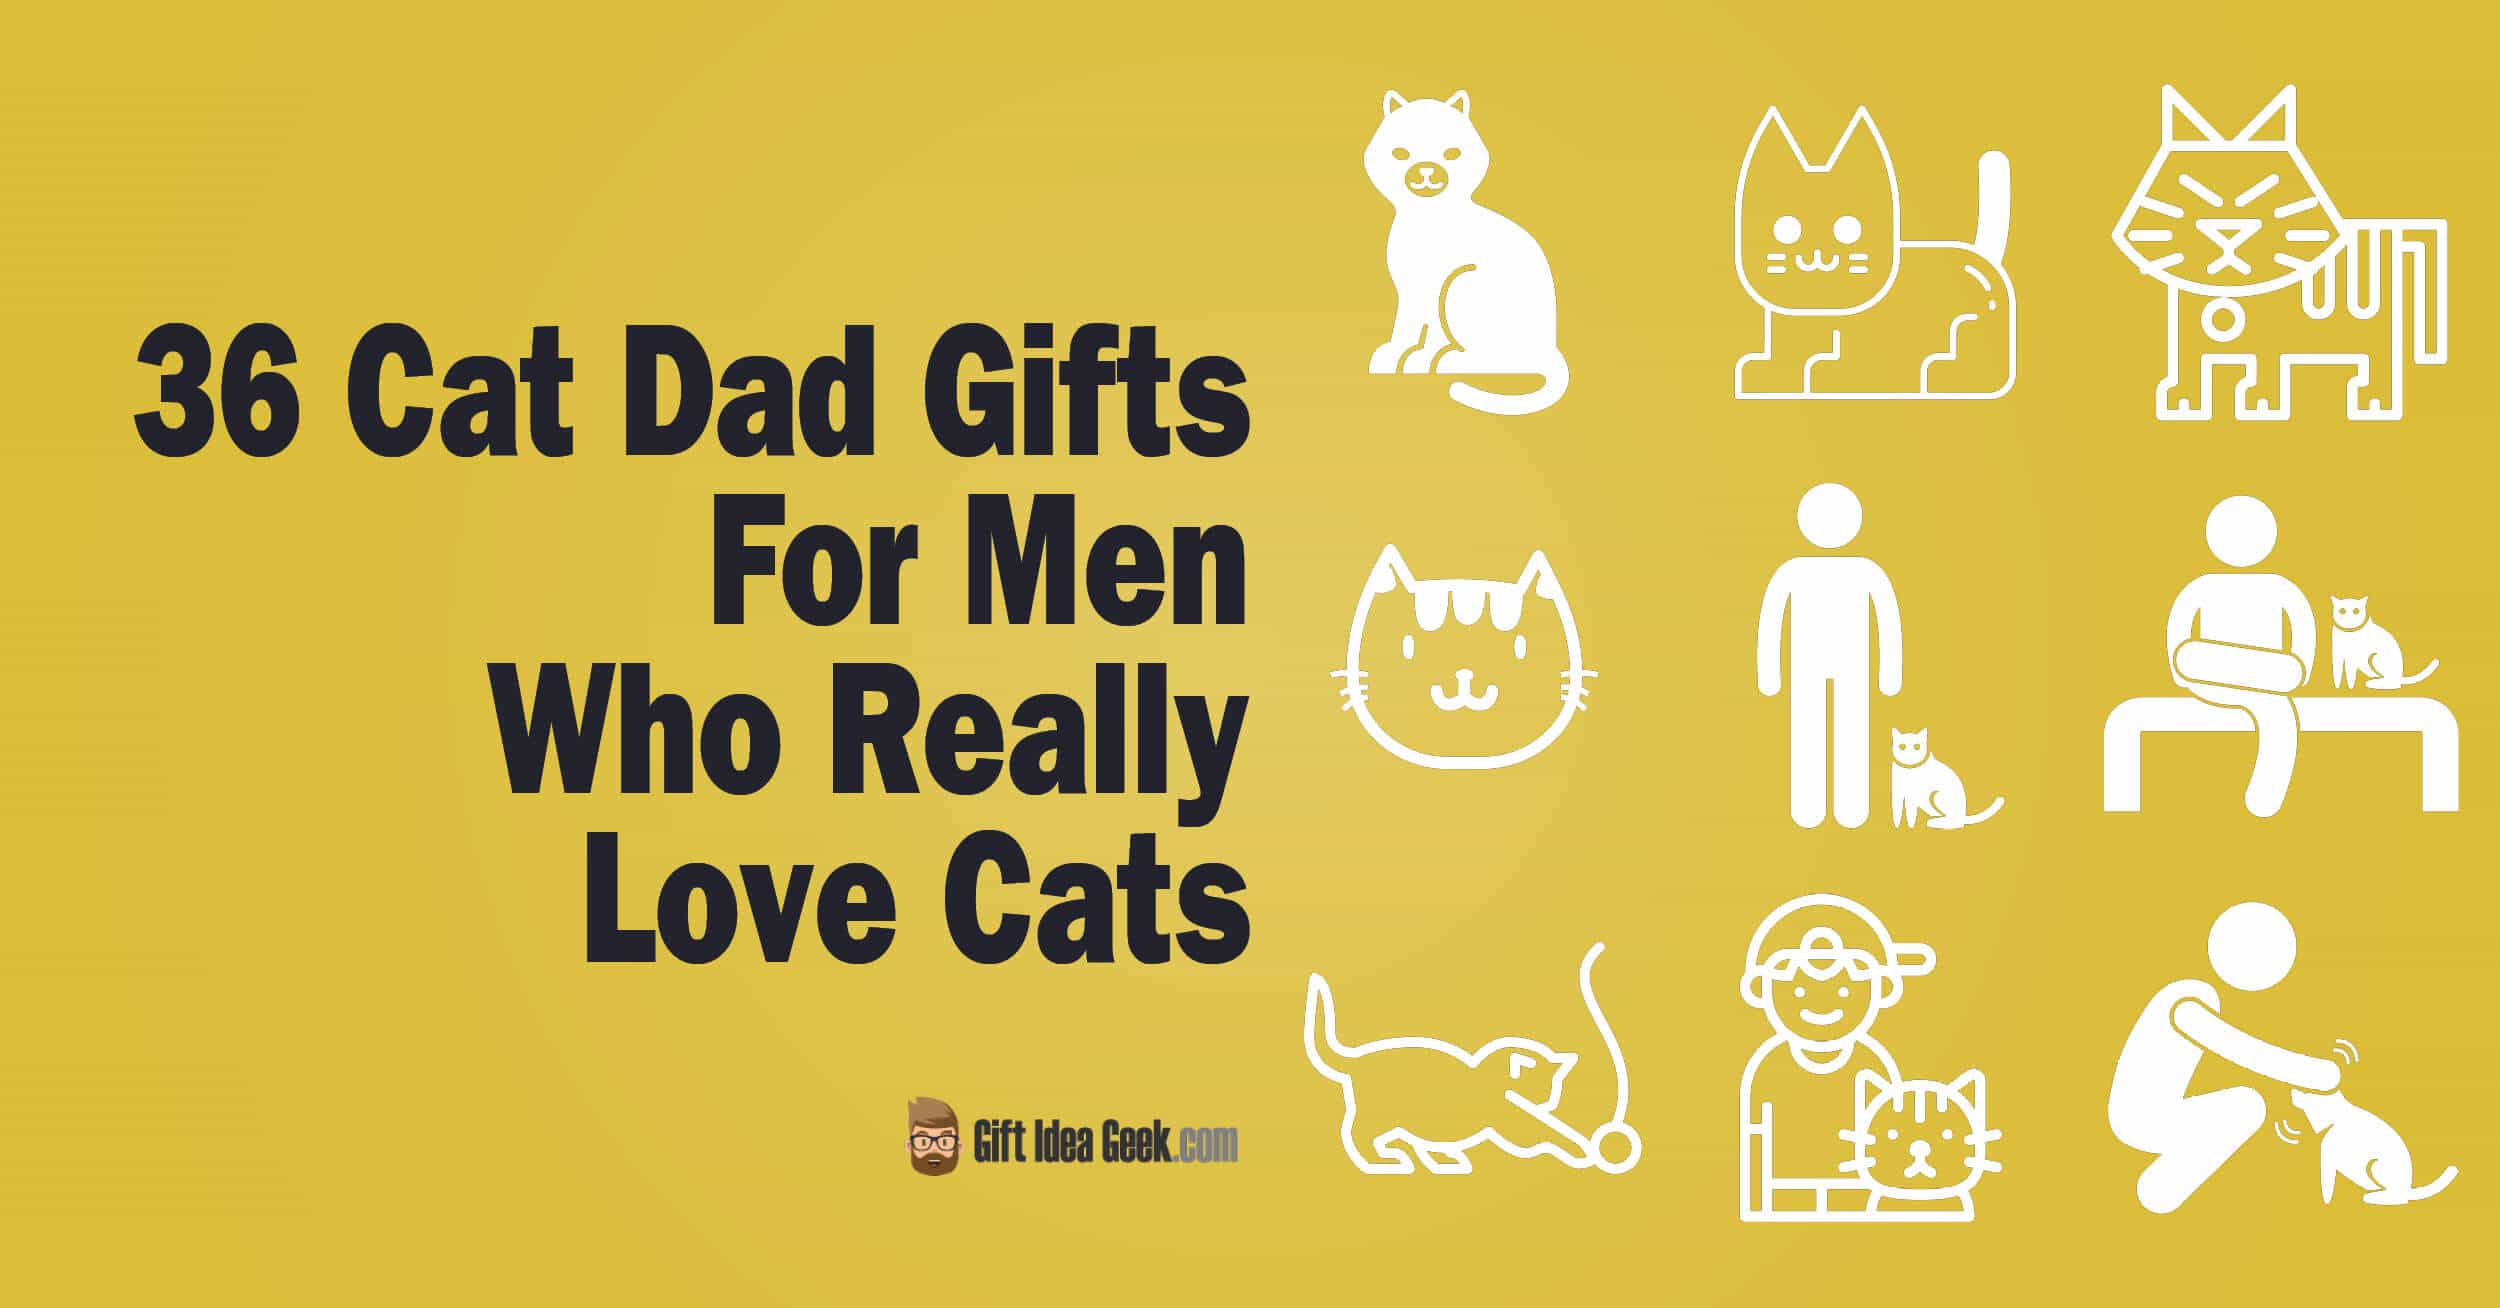 36 Cat Dad Gifts For Men Who Really Love Cats